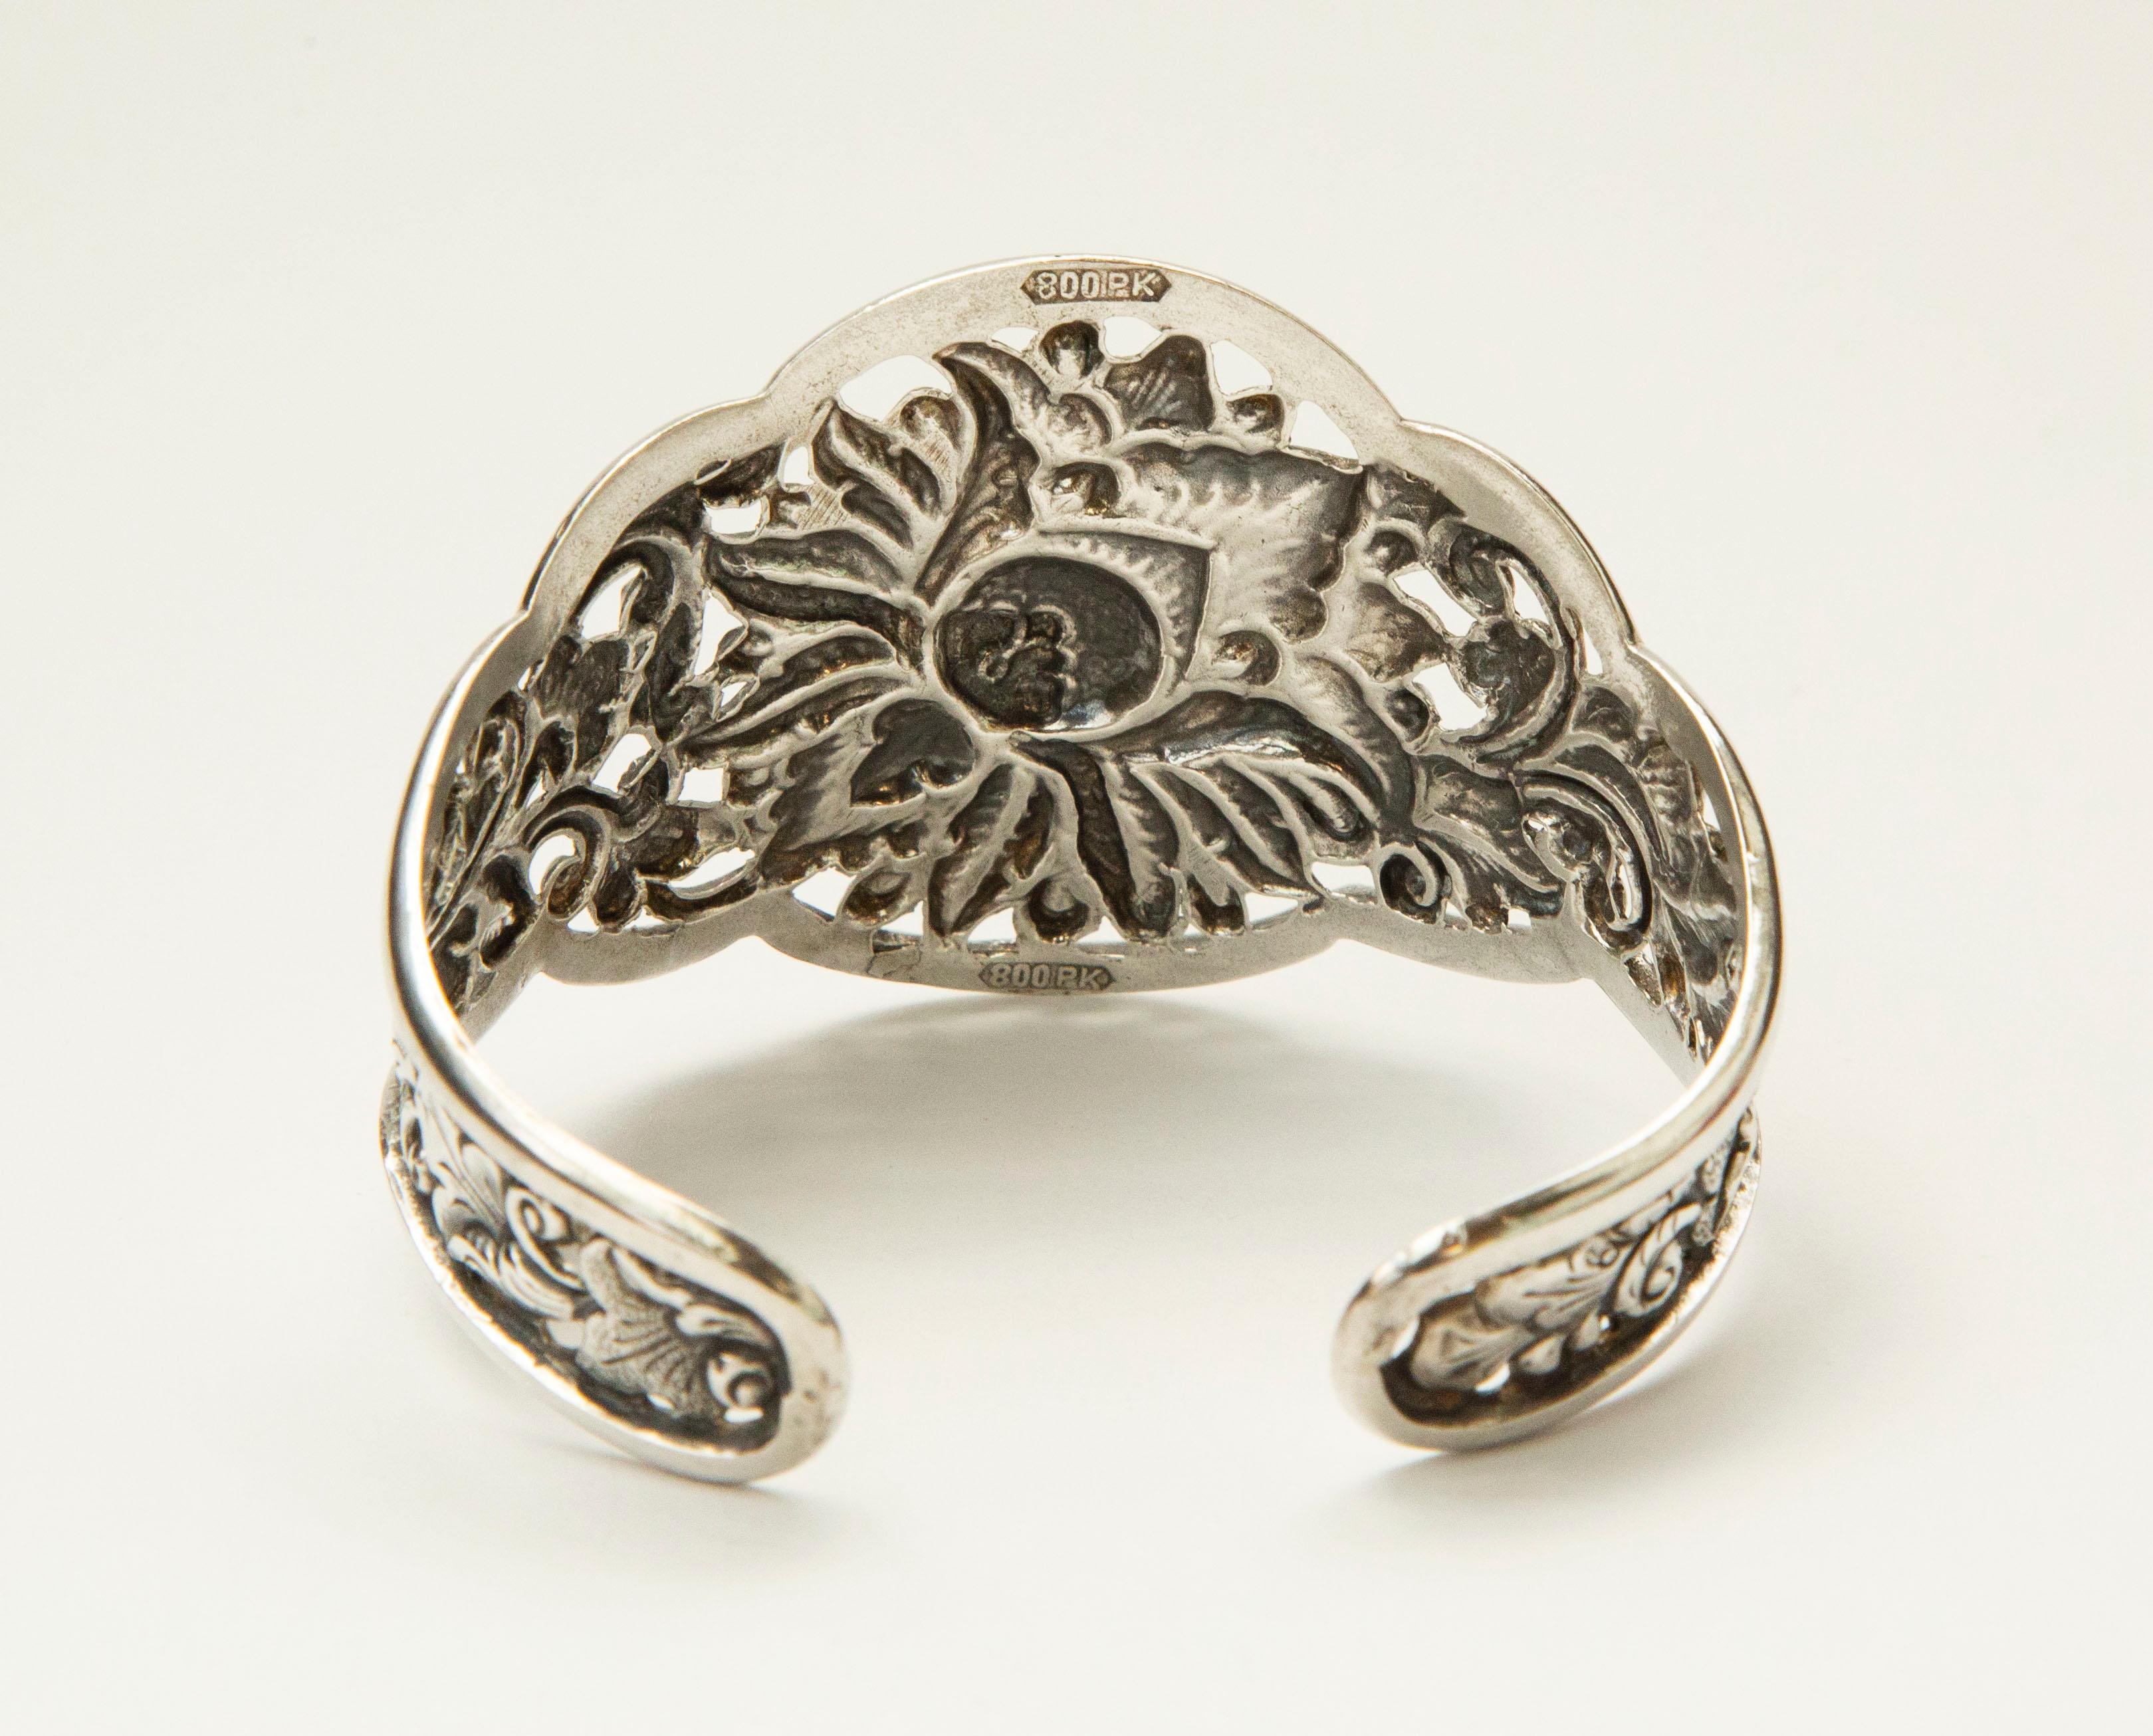 Vintage Indonesian Silver 800 Cuff Bracelet with Floral Decor CA. 1930s For Sale 3